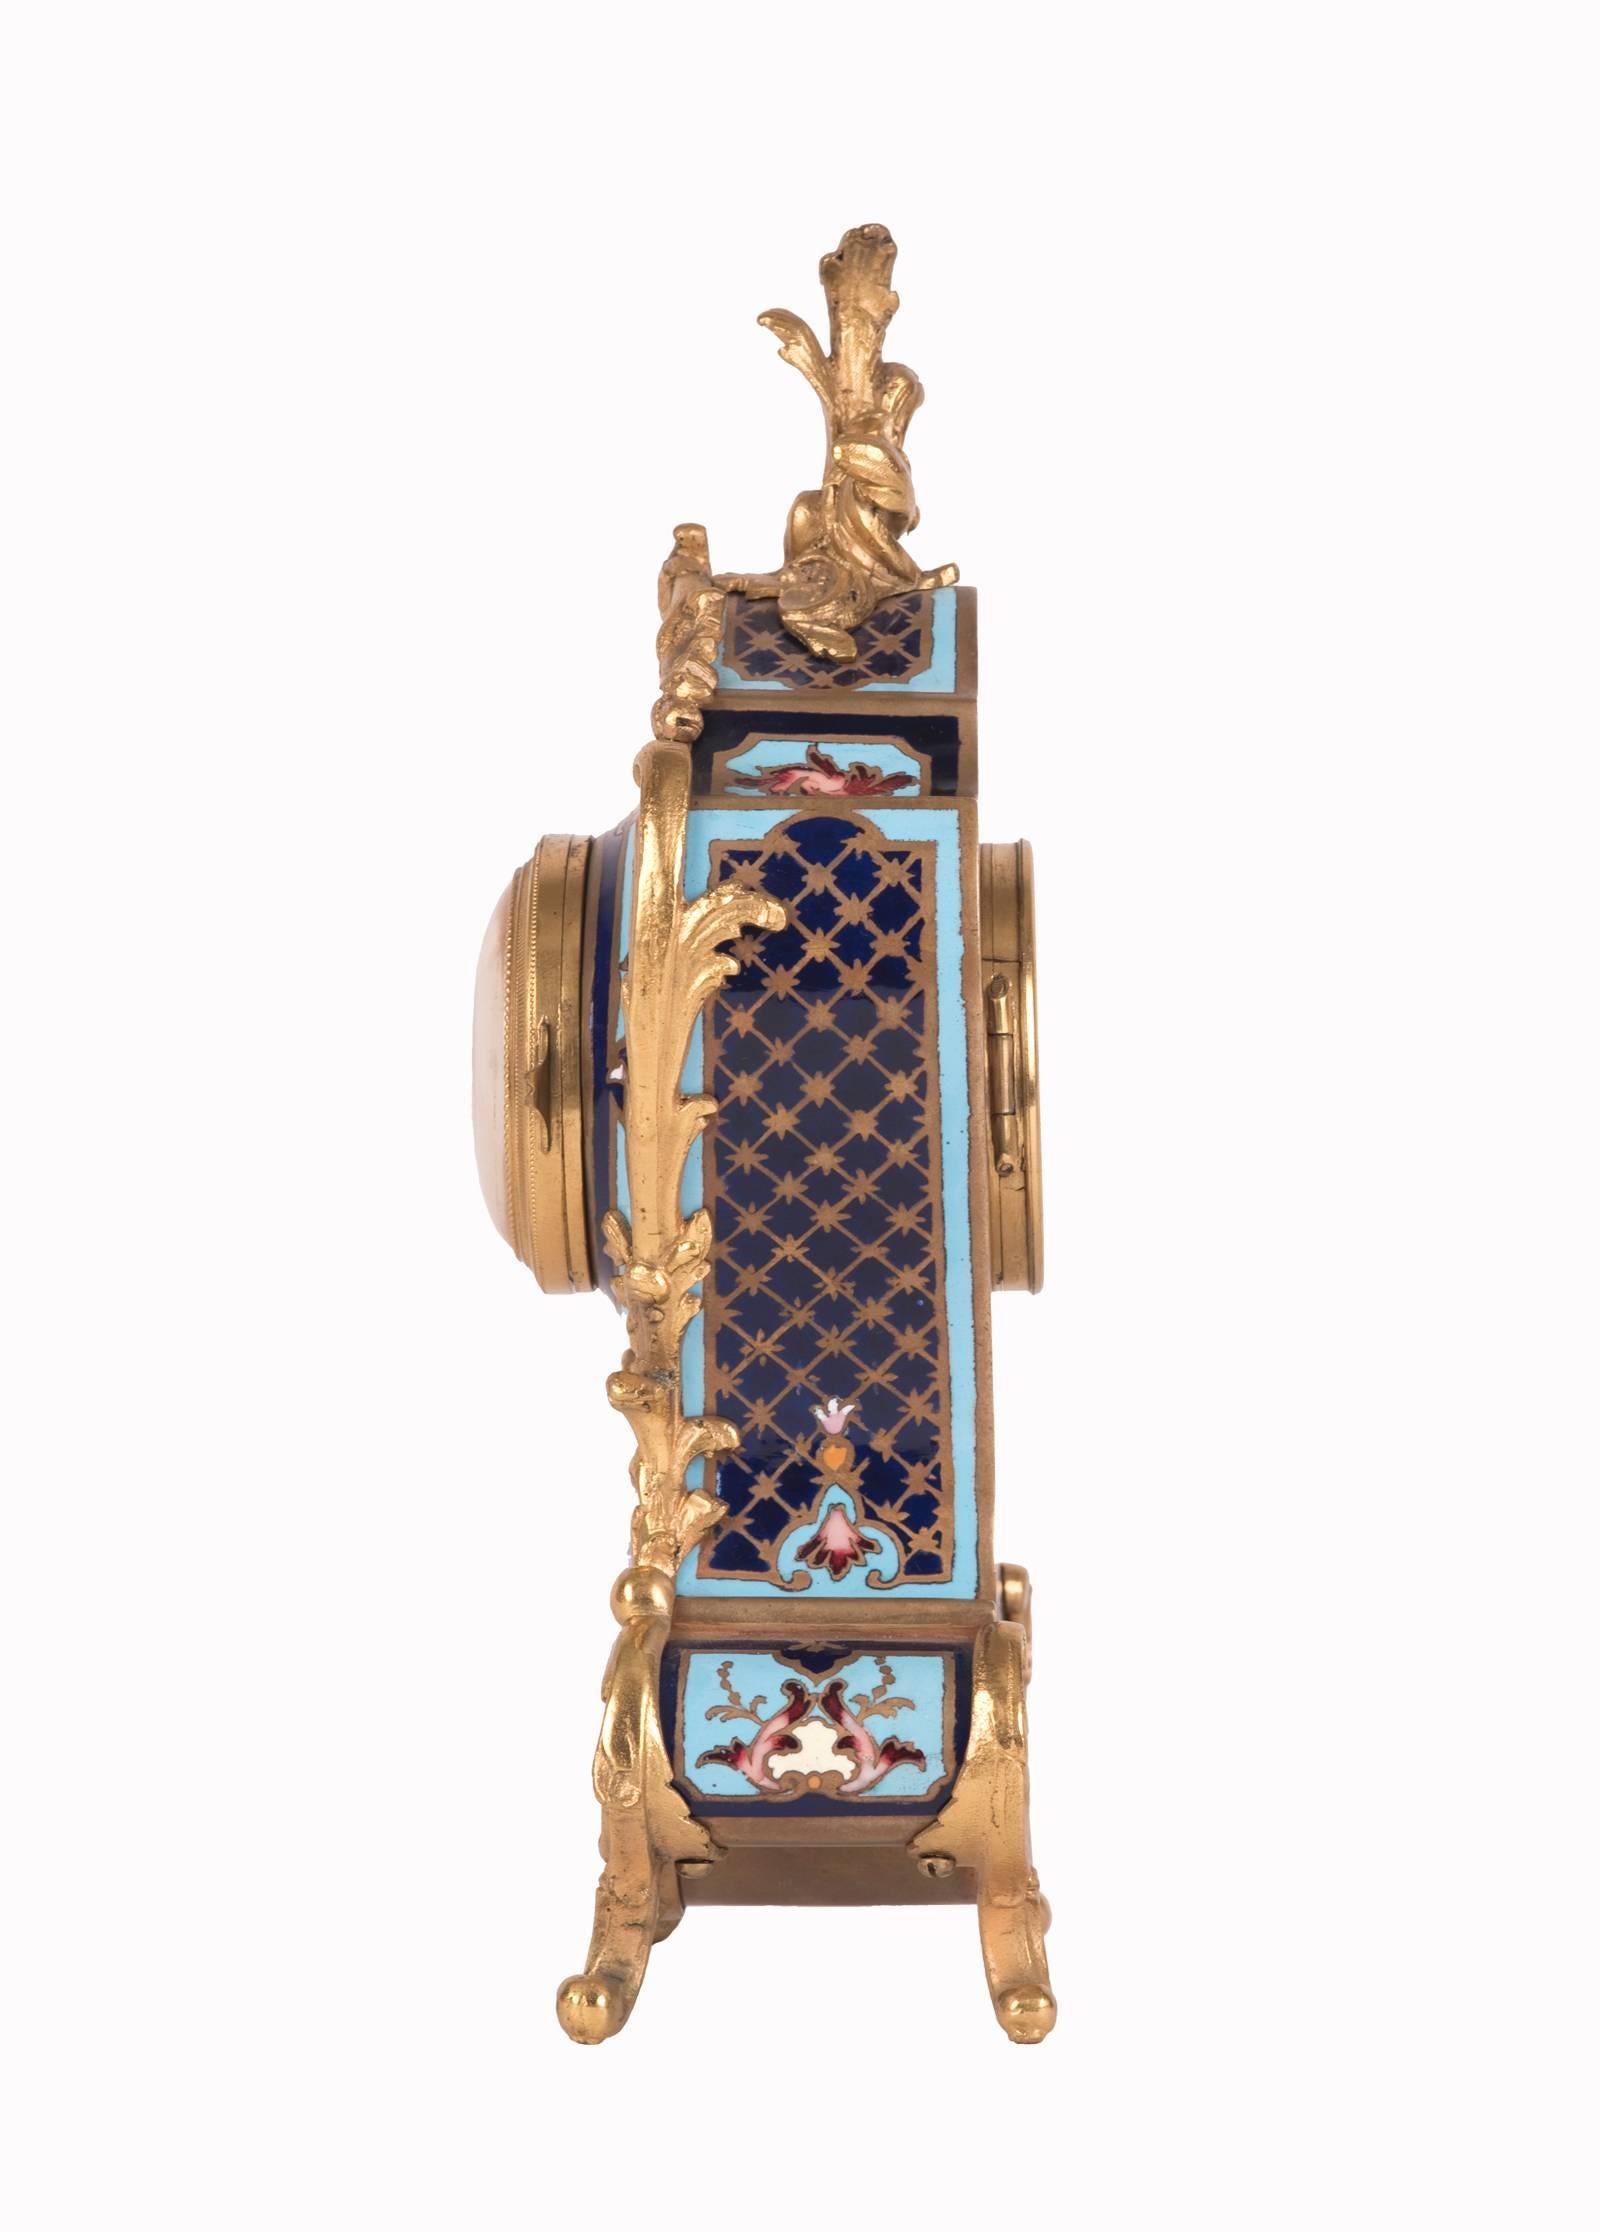 Louis XV Style Cloisonné Gilt Bronze-Mounted Mantel Clock In Good Condition For Sale In Salt Lake City, UT